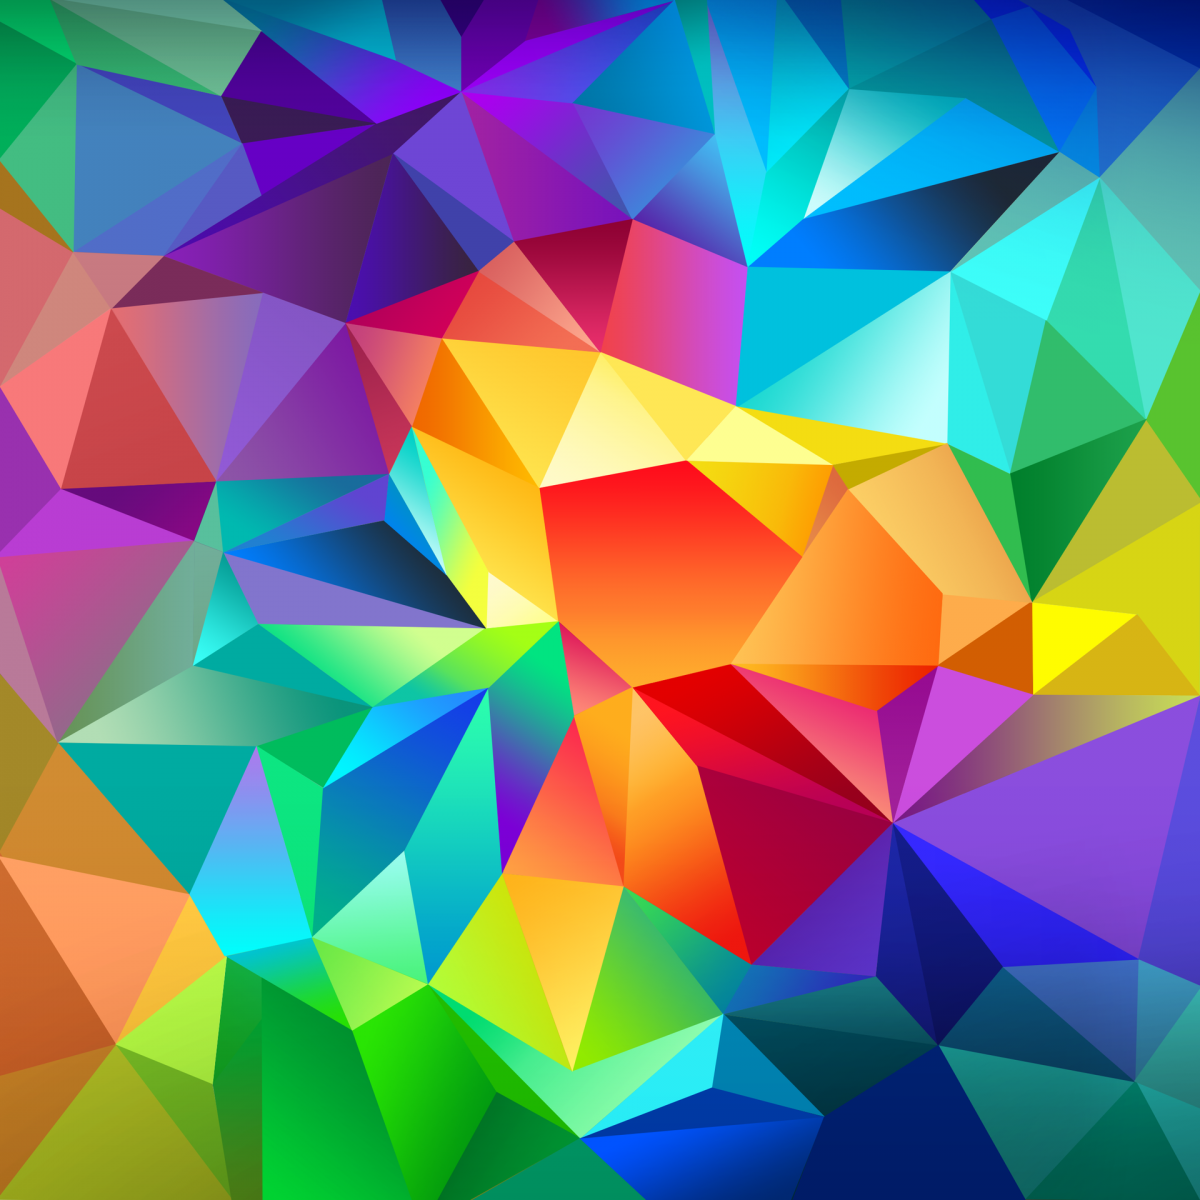 Download] Get all the Samsung Galaxy S5 wallpapers here Now 1200x1200